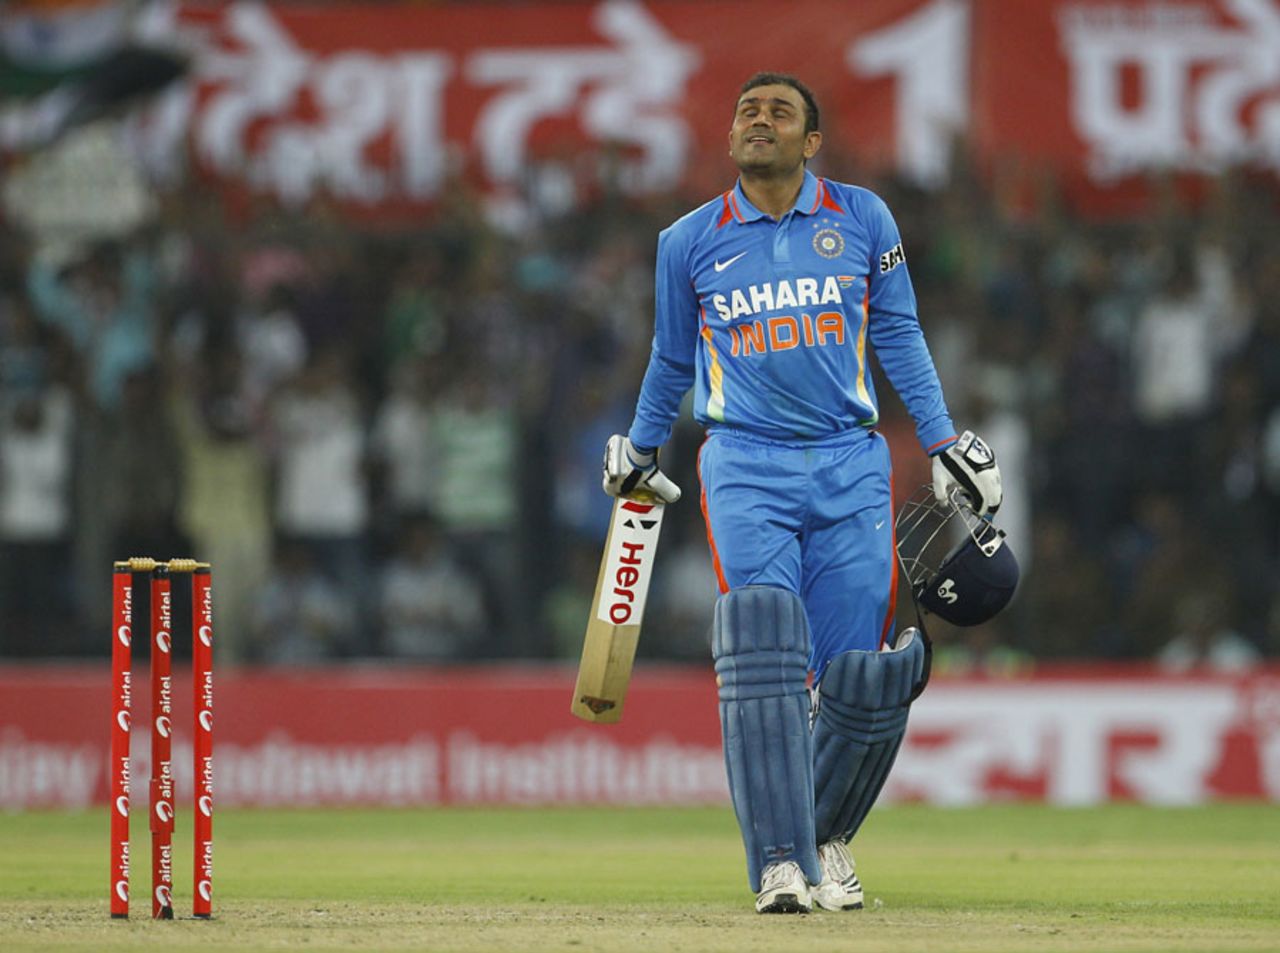 Virender Sehwag reacts after getting to a double-ton, India v West Indies, 4th ODI, Indore, December 8, 2011